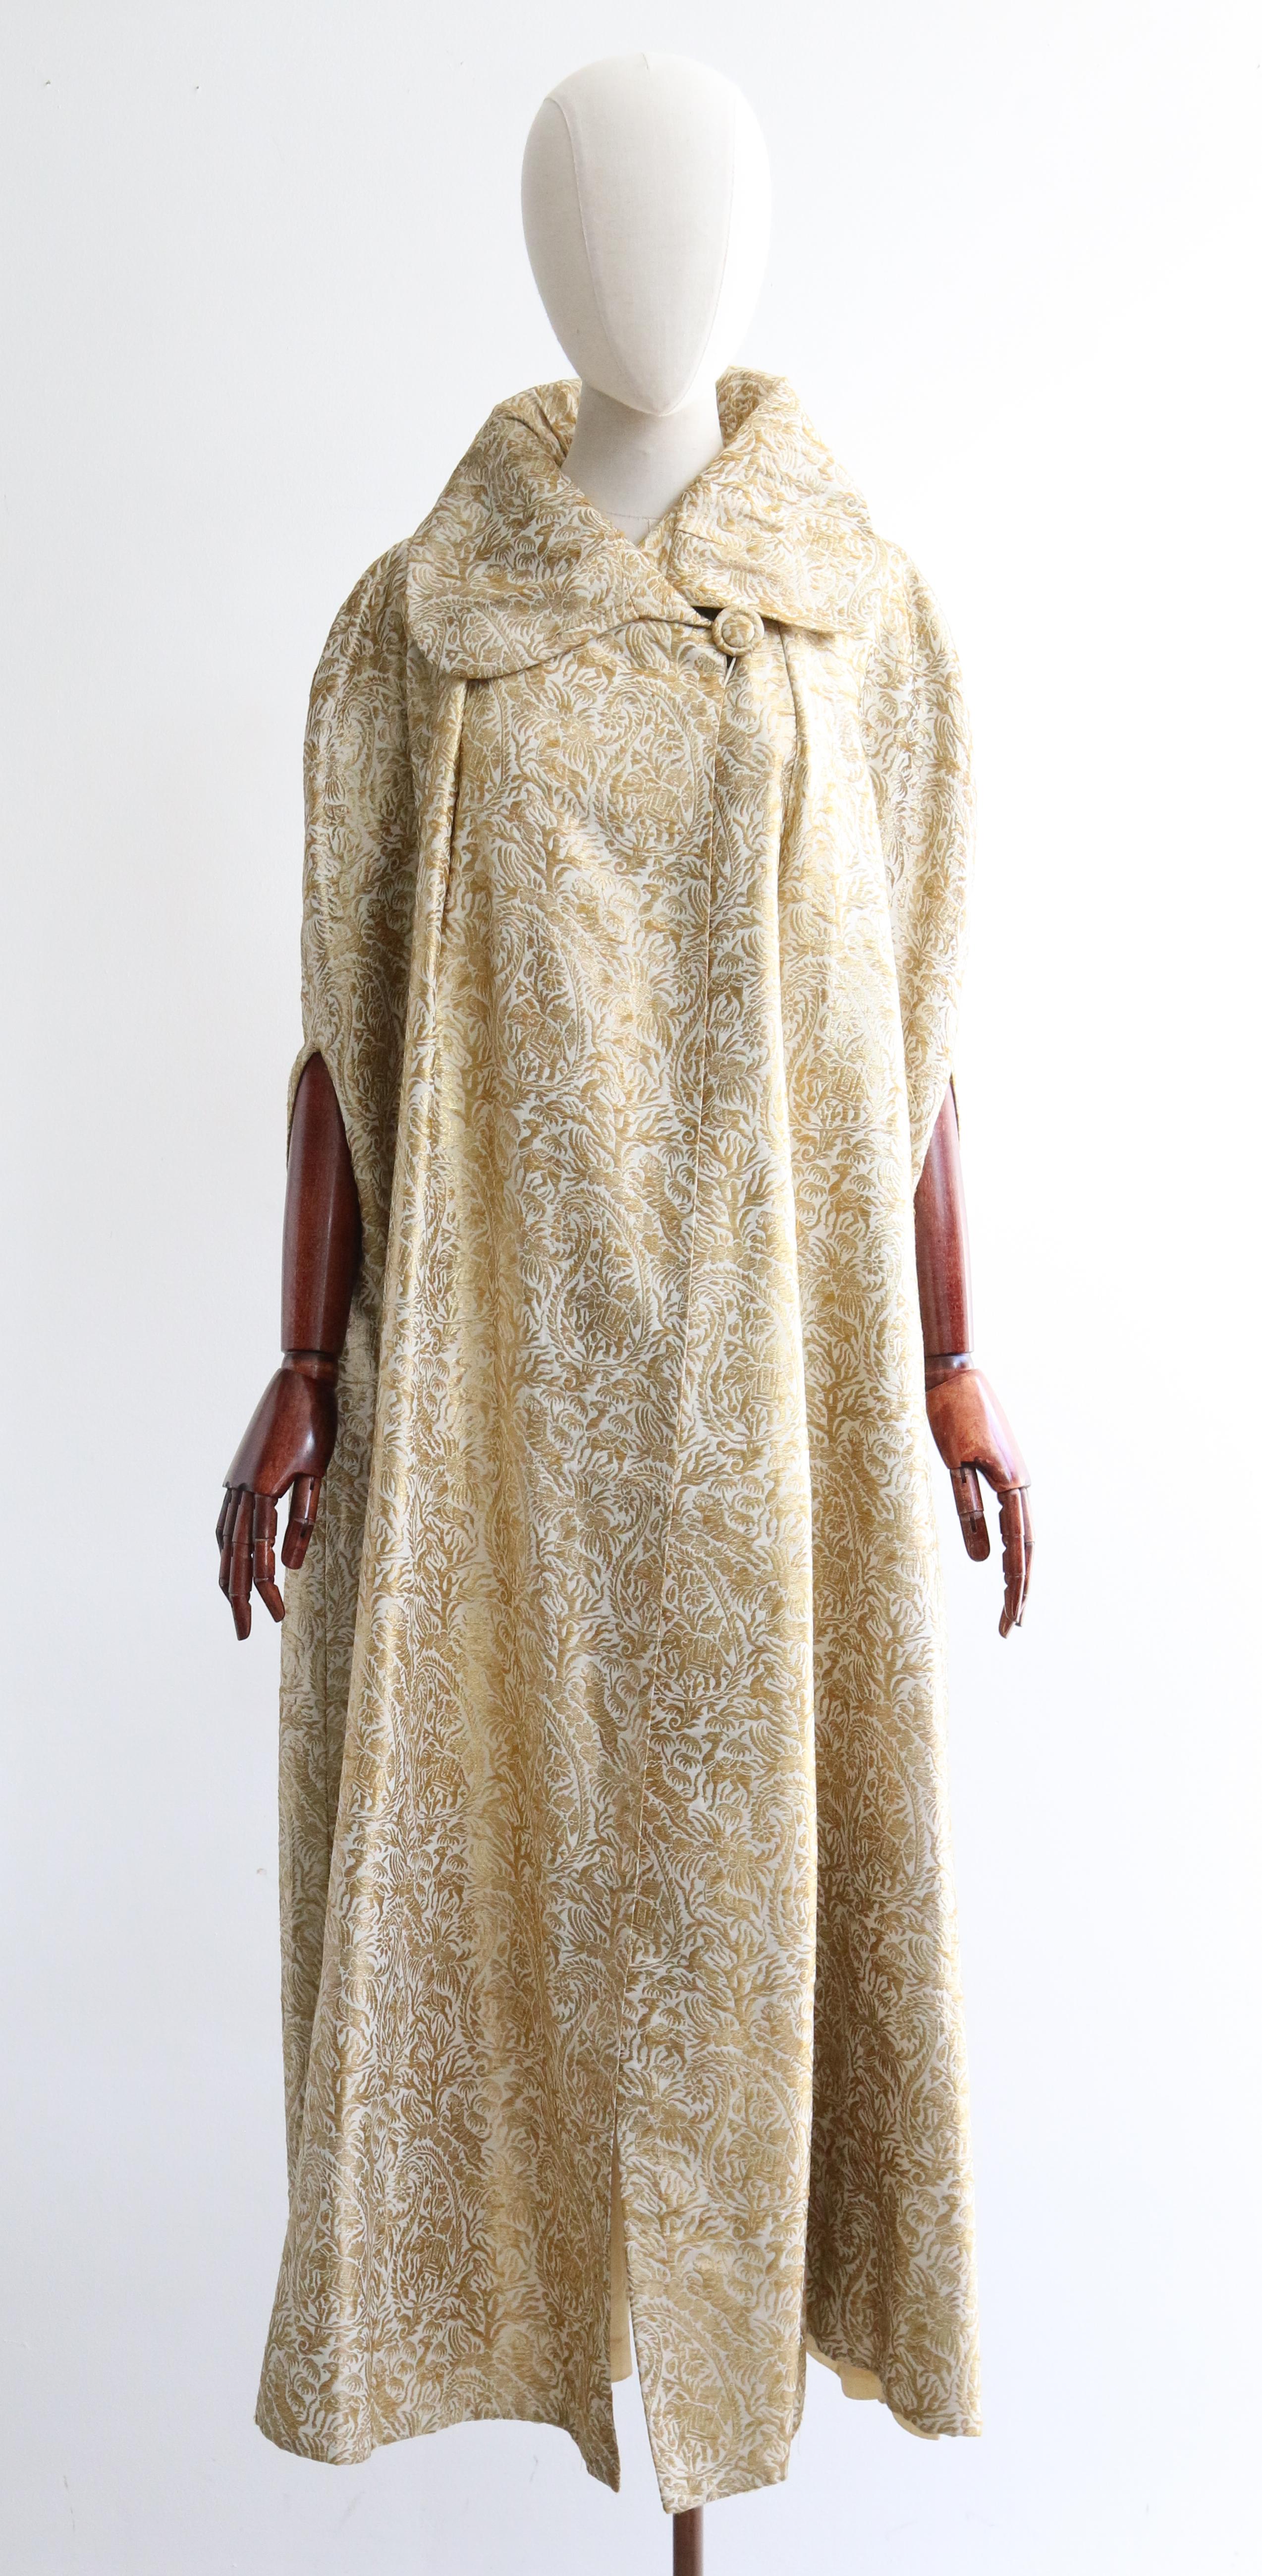 A rare piece to behold and never again find, this original early 1930's cream silk and gold lamé evening cape, rendered in a decadent paisley and animal pattern, is the perfect statement piece for your evening wardrobe.

The wonderful wide rounded